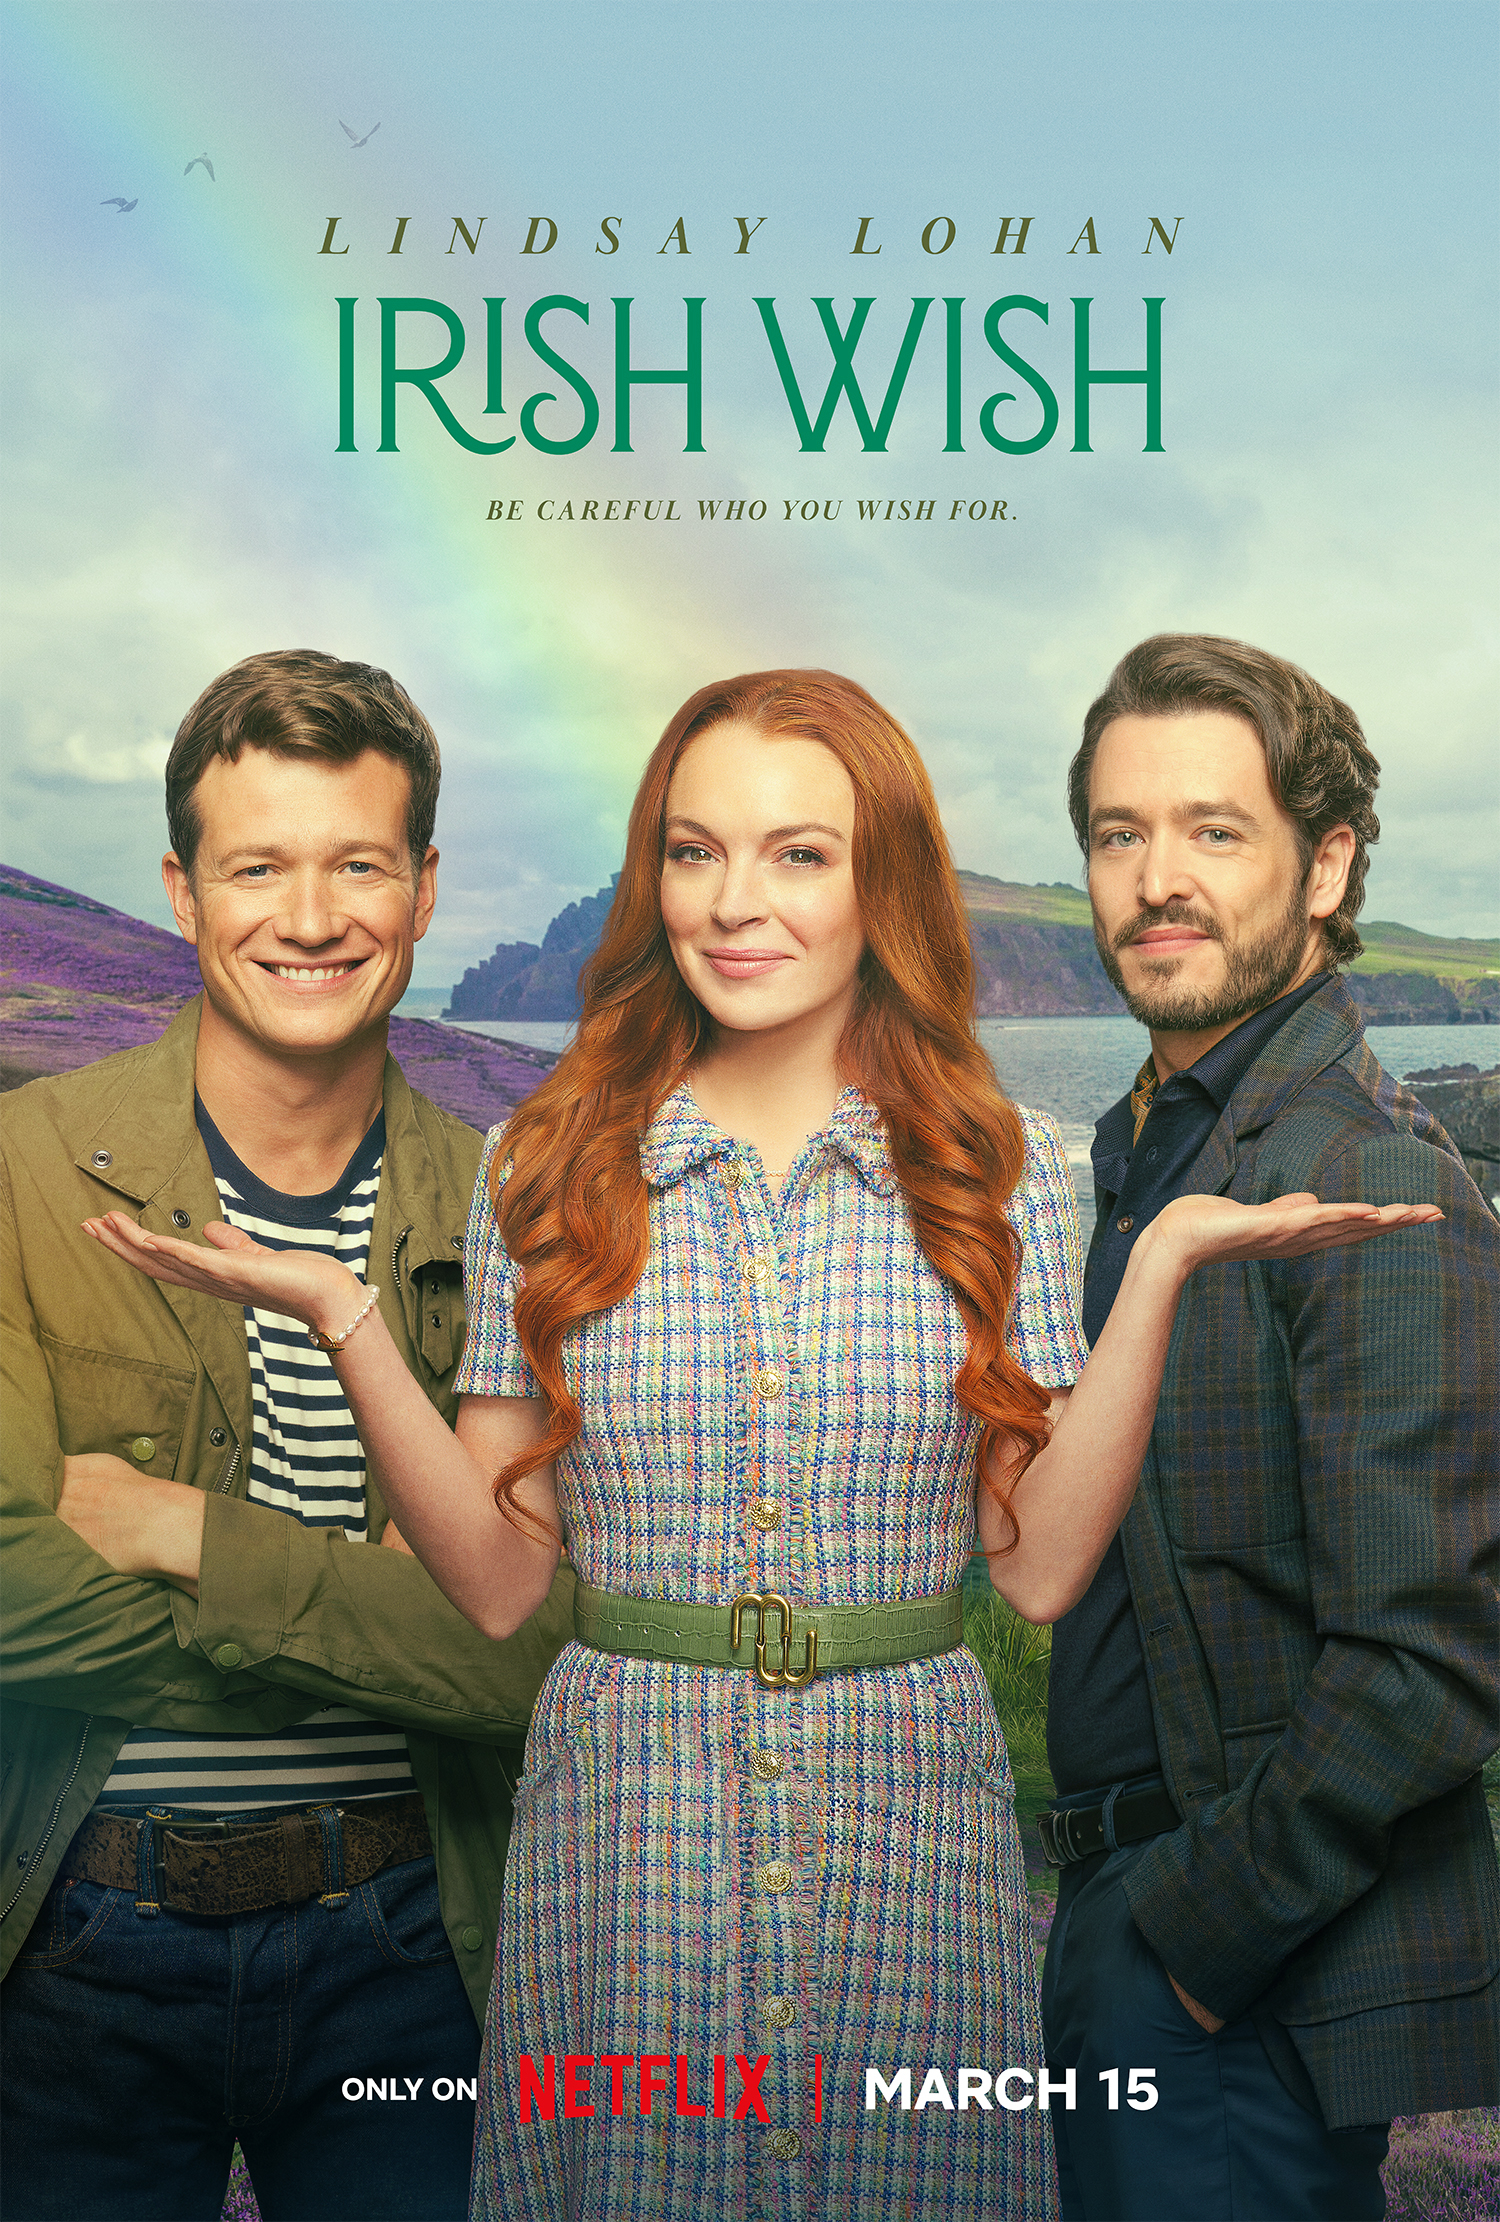 Movie poster for &quot;Irish Wish&quot; showing three smiling actors, with text announcing its Netflix release on March 15